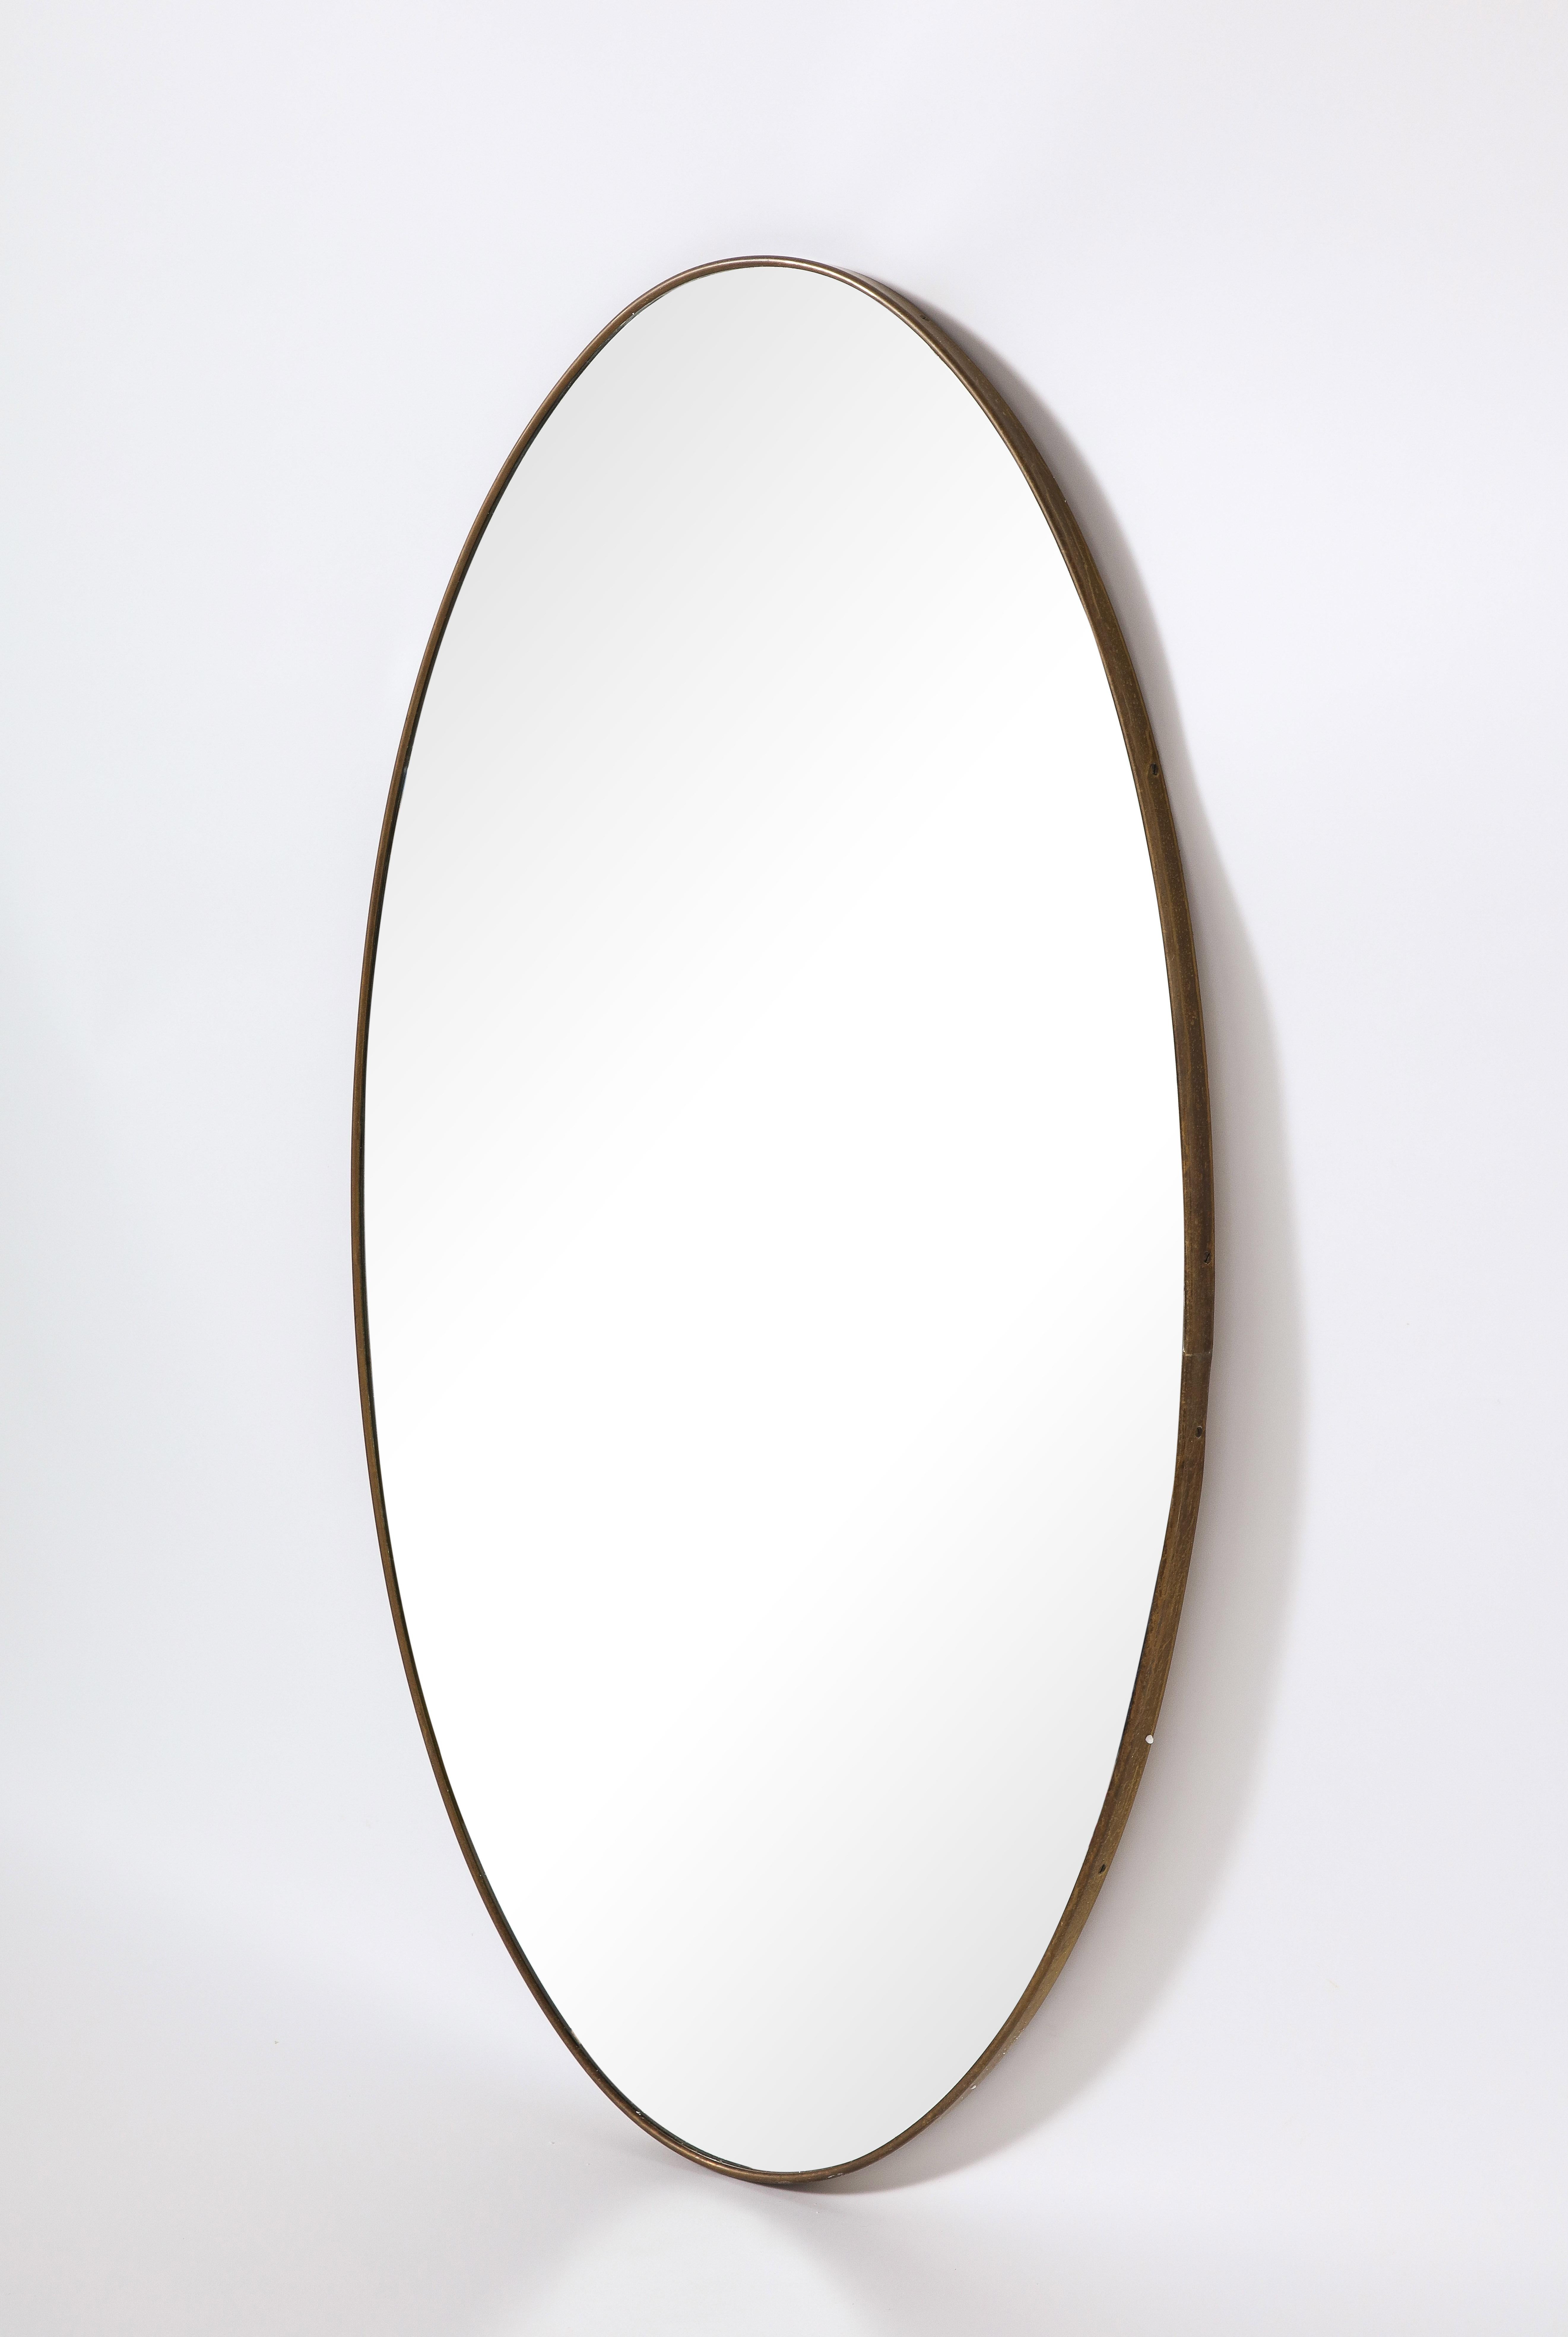 Pair of Italian Modernist Brass Oval Grand Scale Wall Mirrors, Italy, circa 1950 For Sale 3